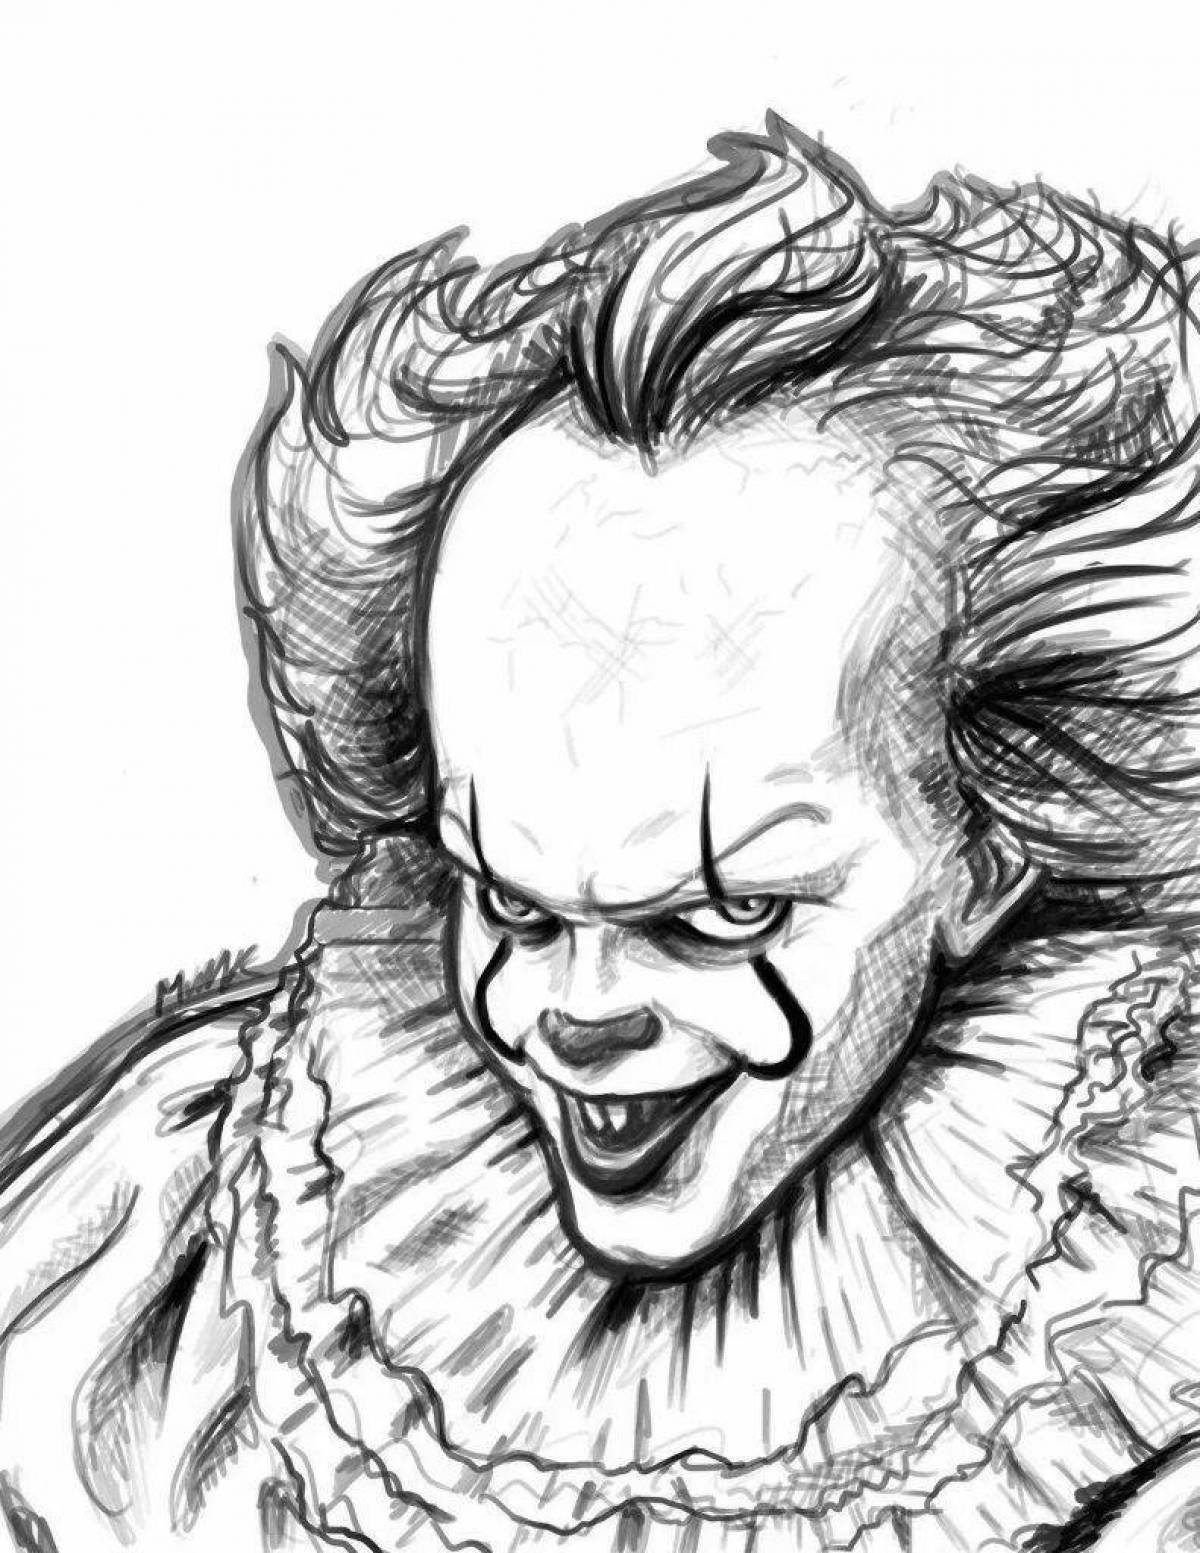 Pennywise's unforgivable coloring book